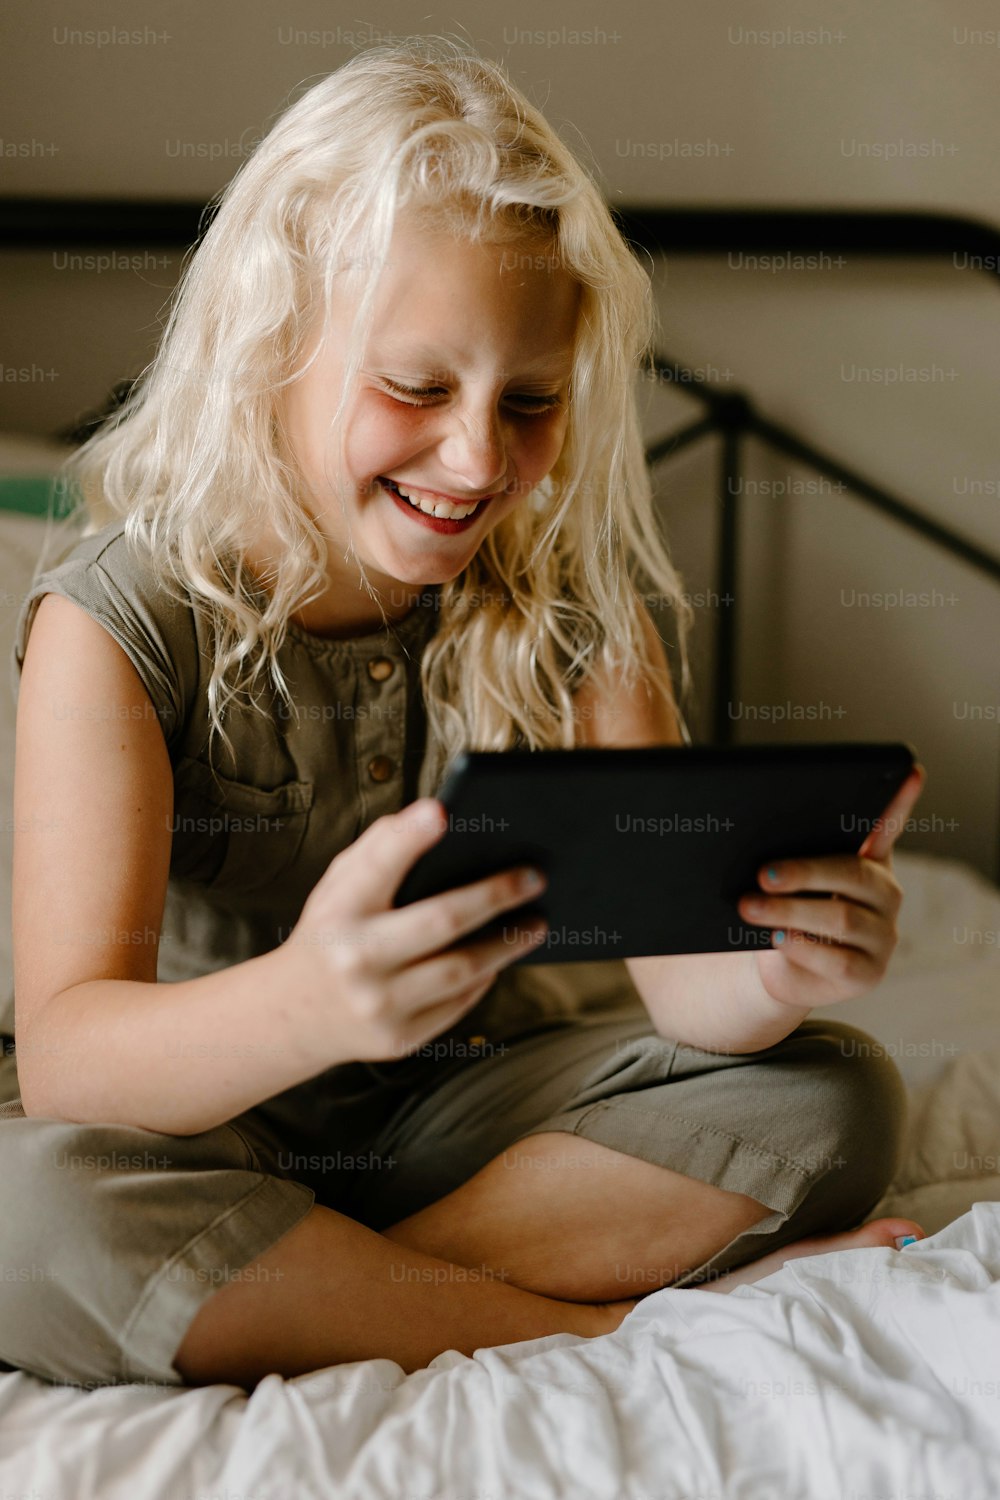 a little girl sitting on a bed looking at a tablet